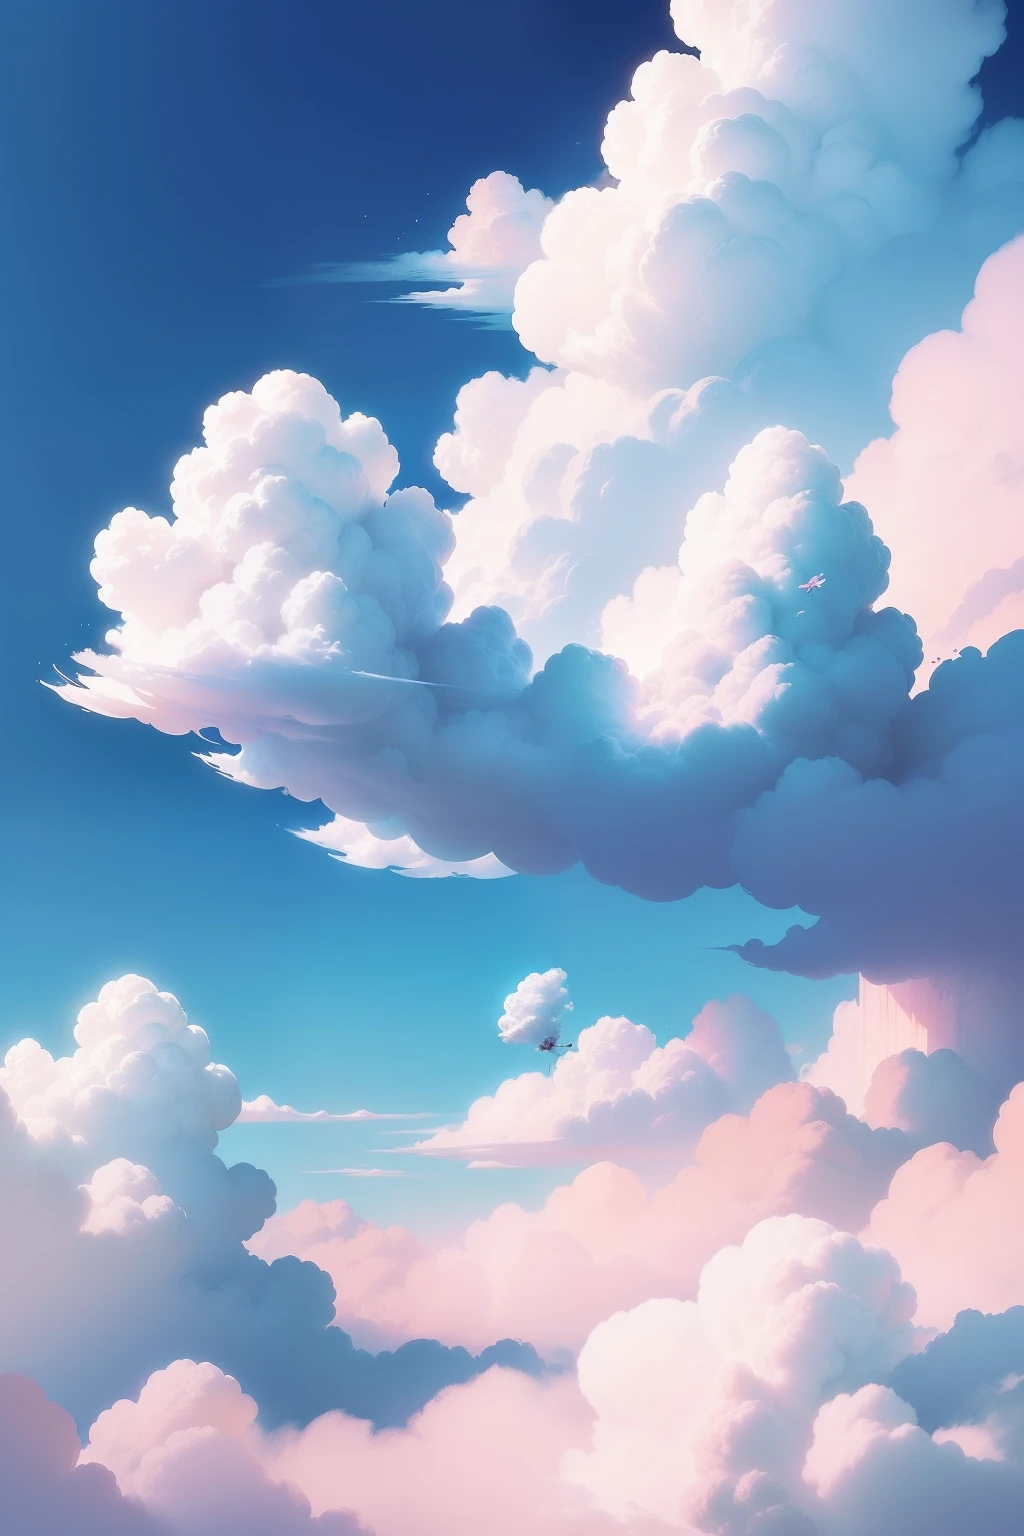 Illustrations, children's books,
Draw a scene of cherry blossoms blooming in a fluffy cloud. Try to depict the flowers popping up from the clouds and dancing gracefully. The blue of the sky and the color of the flowers should be beautiful.